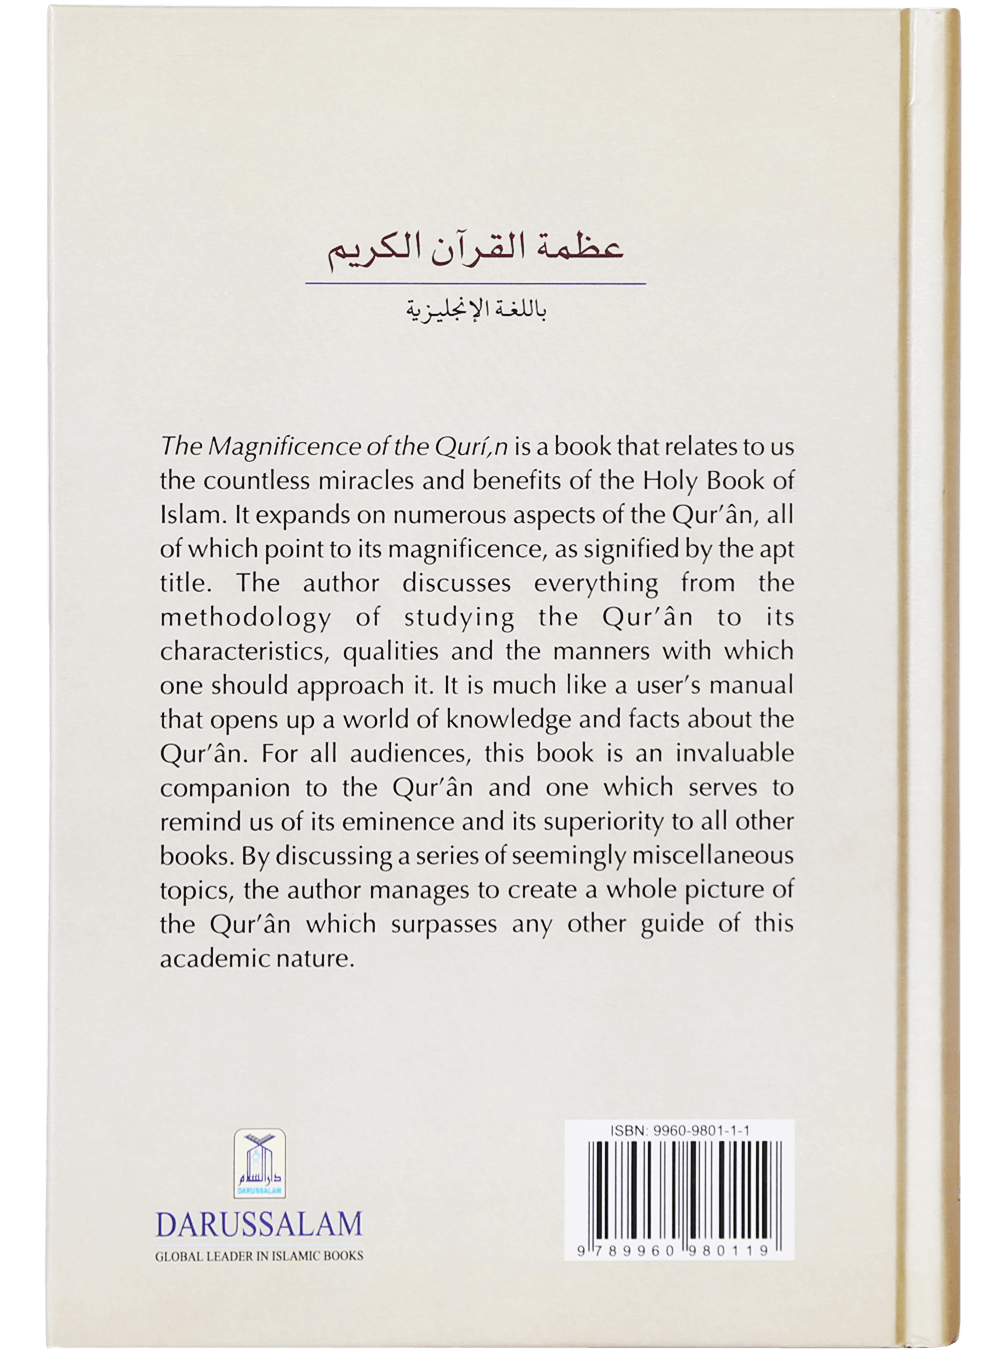 darussalam-2017-08-08-15-31-31the-magnificence-of-the-quran-(5)